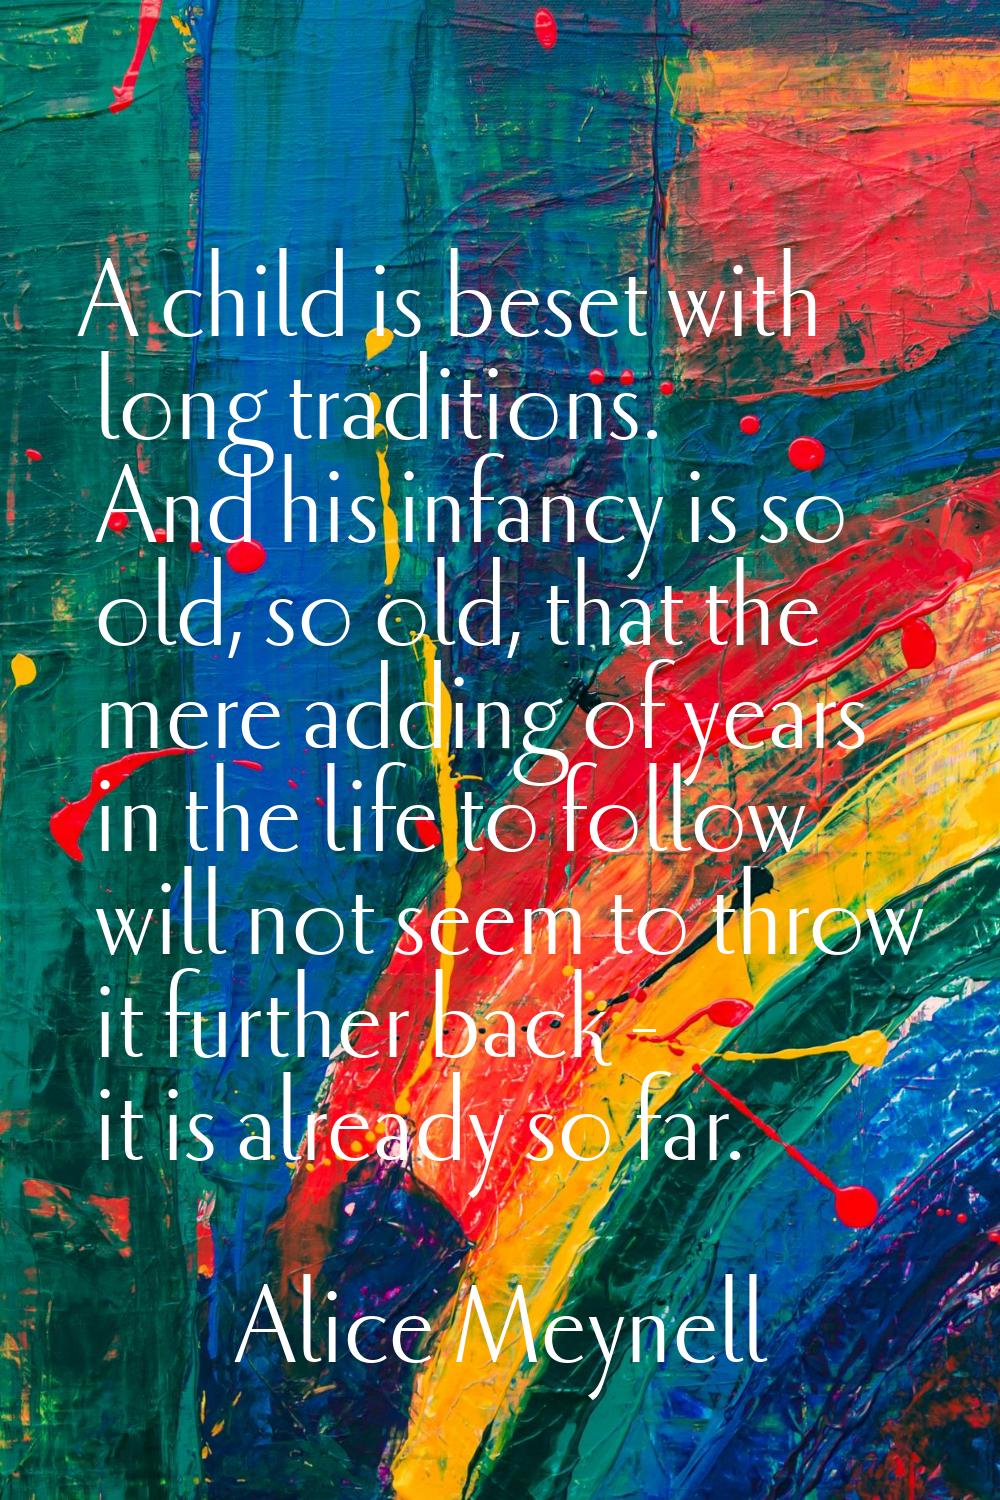 A child is beset with long traditions. And his infancy is so old, so old, that the mere adding of y